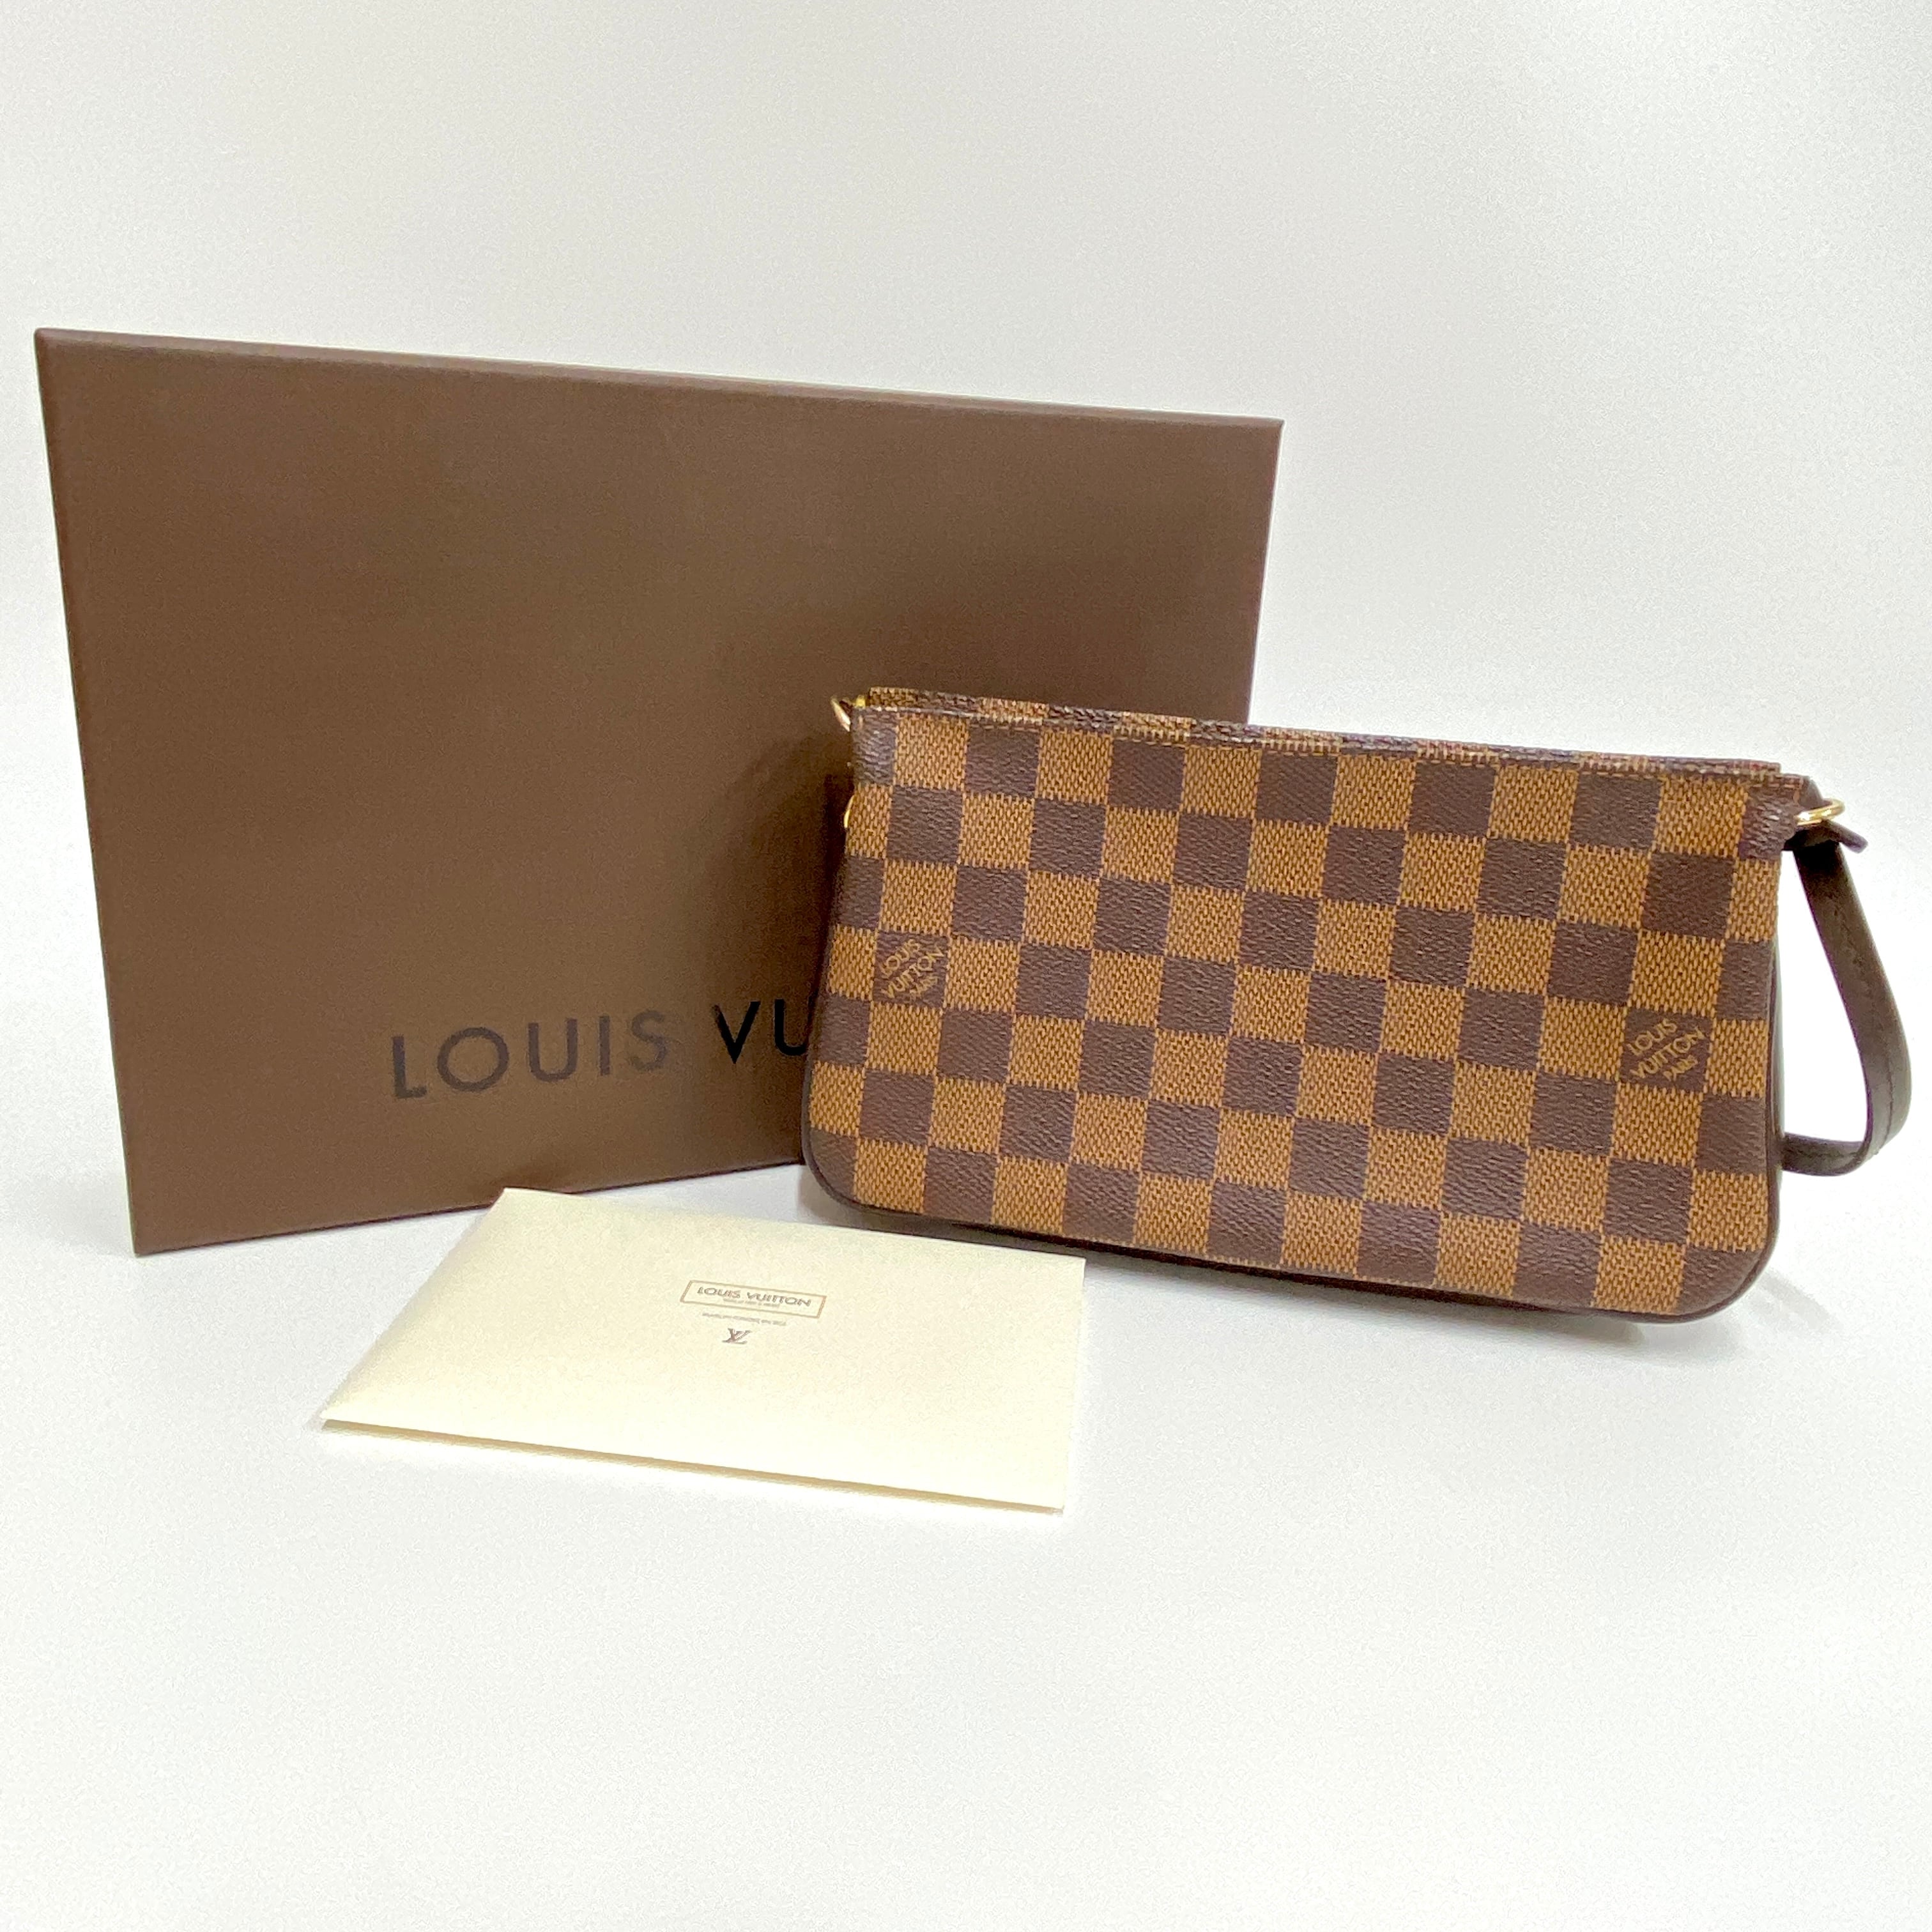 LOUIS VUITTON ルイ・ヴィトン ダミエ ポシェット アクセソワール 9472-202301 | rean powered by BASE